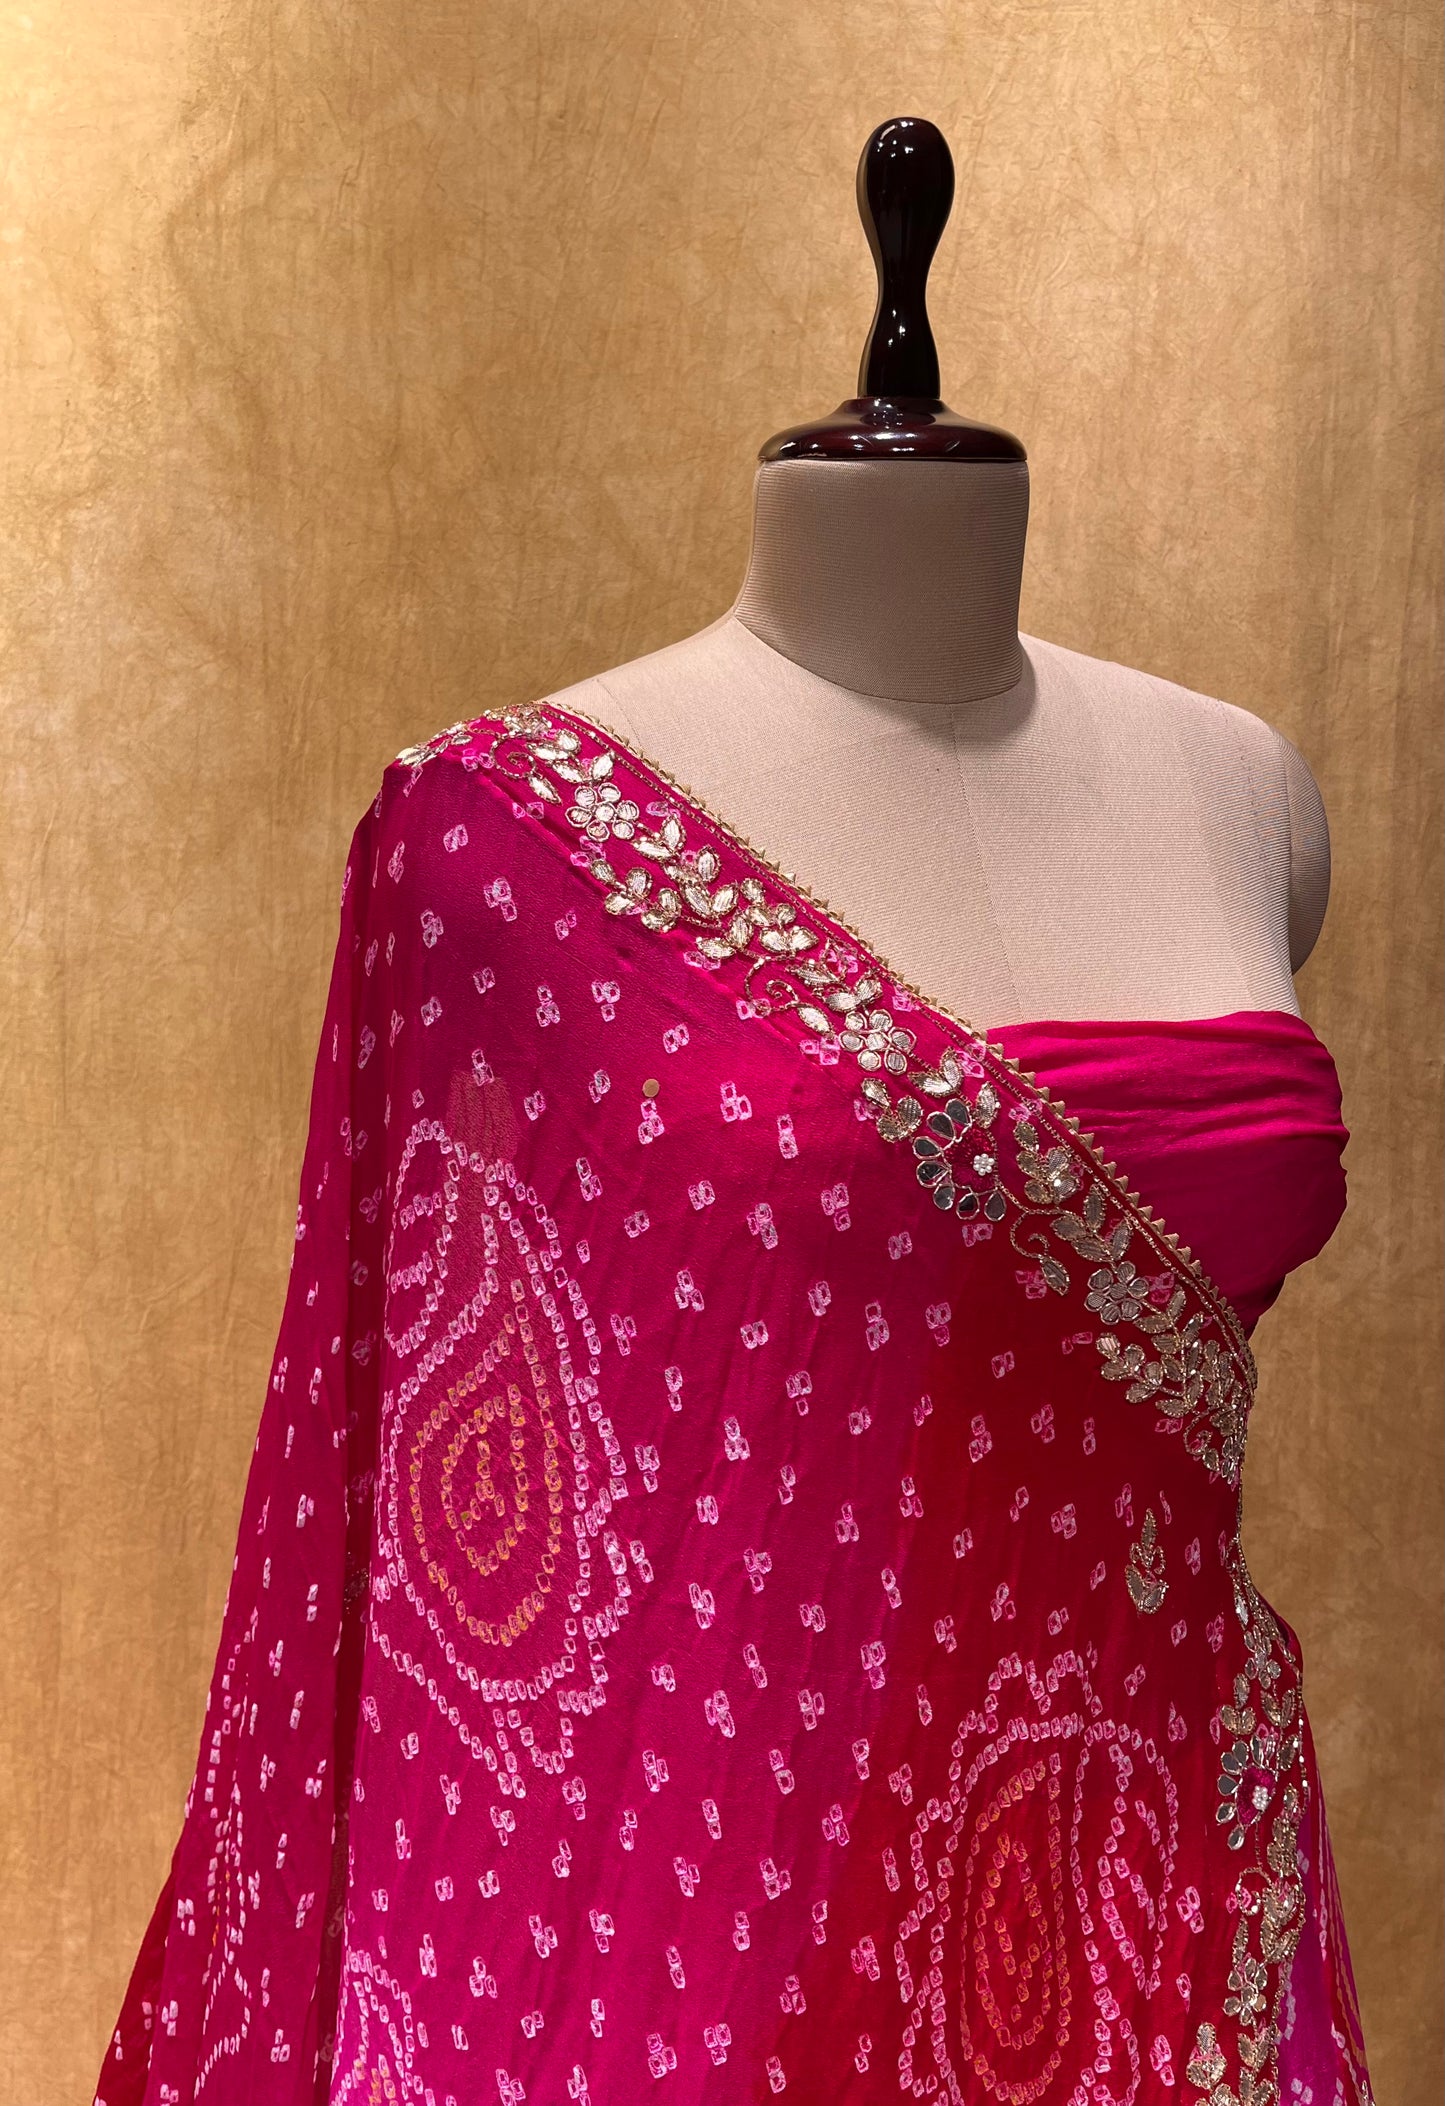 (DELIVERY IN 25 DAYS) PINK COLOUR BANDHEJ OJARIYA LEHENGA WITH UNSTITCHED BLOUSE EMBELLISHED WITH GOTA PATTI & CUTDANA WORK